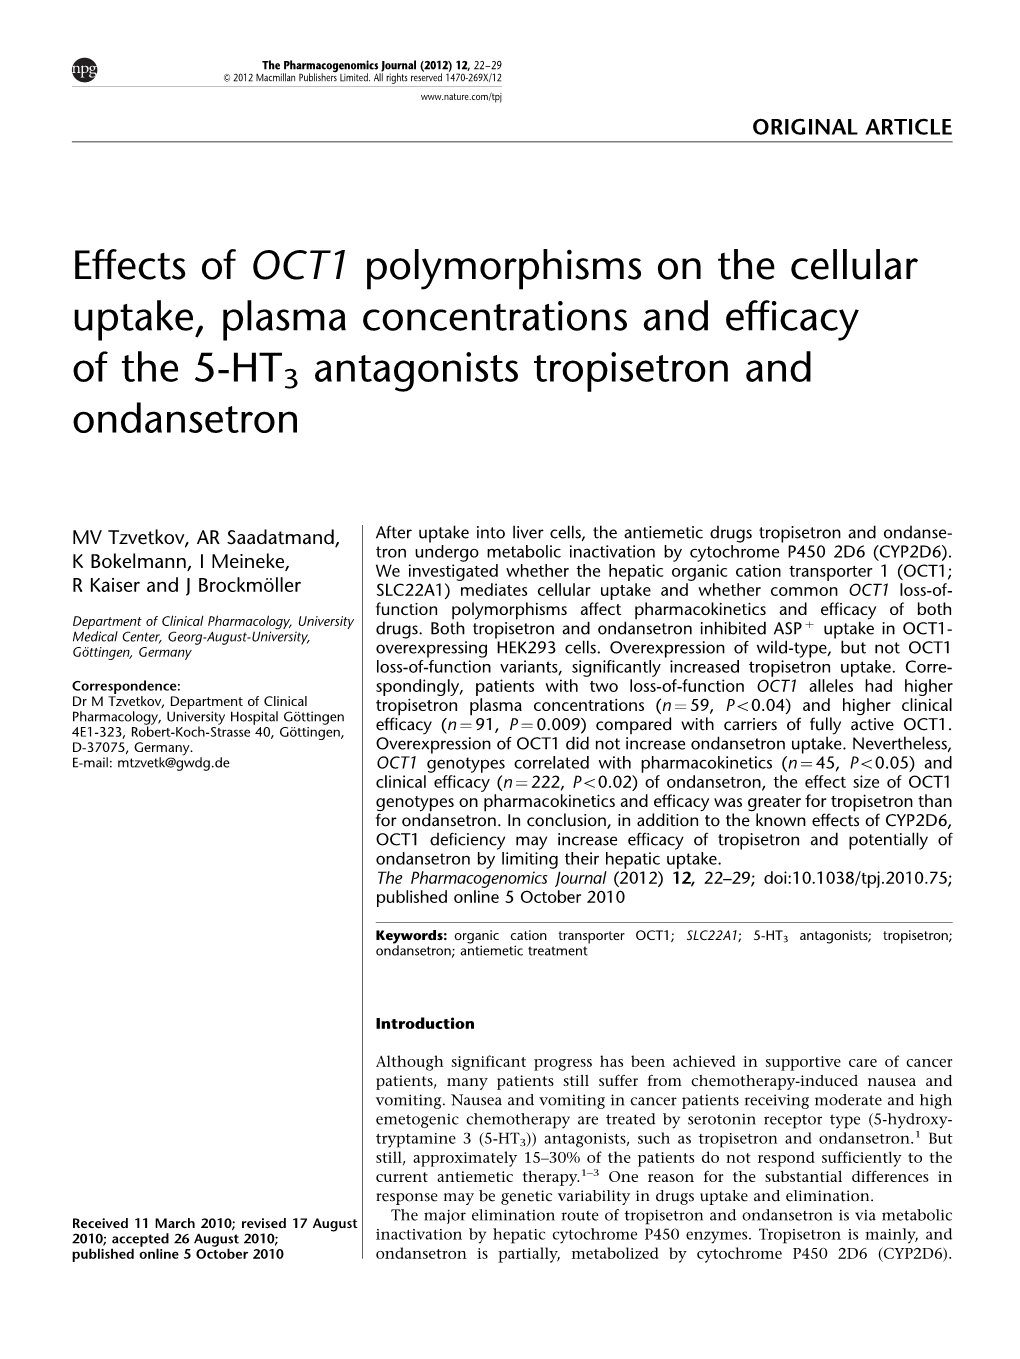 Effects of OCT1 Polymorphisms on the Cellular Uptake, Plasma Concentrations and Efficacy of the 5-HT3 Antagonists Tropisetron and Ondansetron